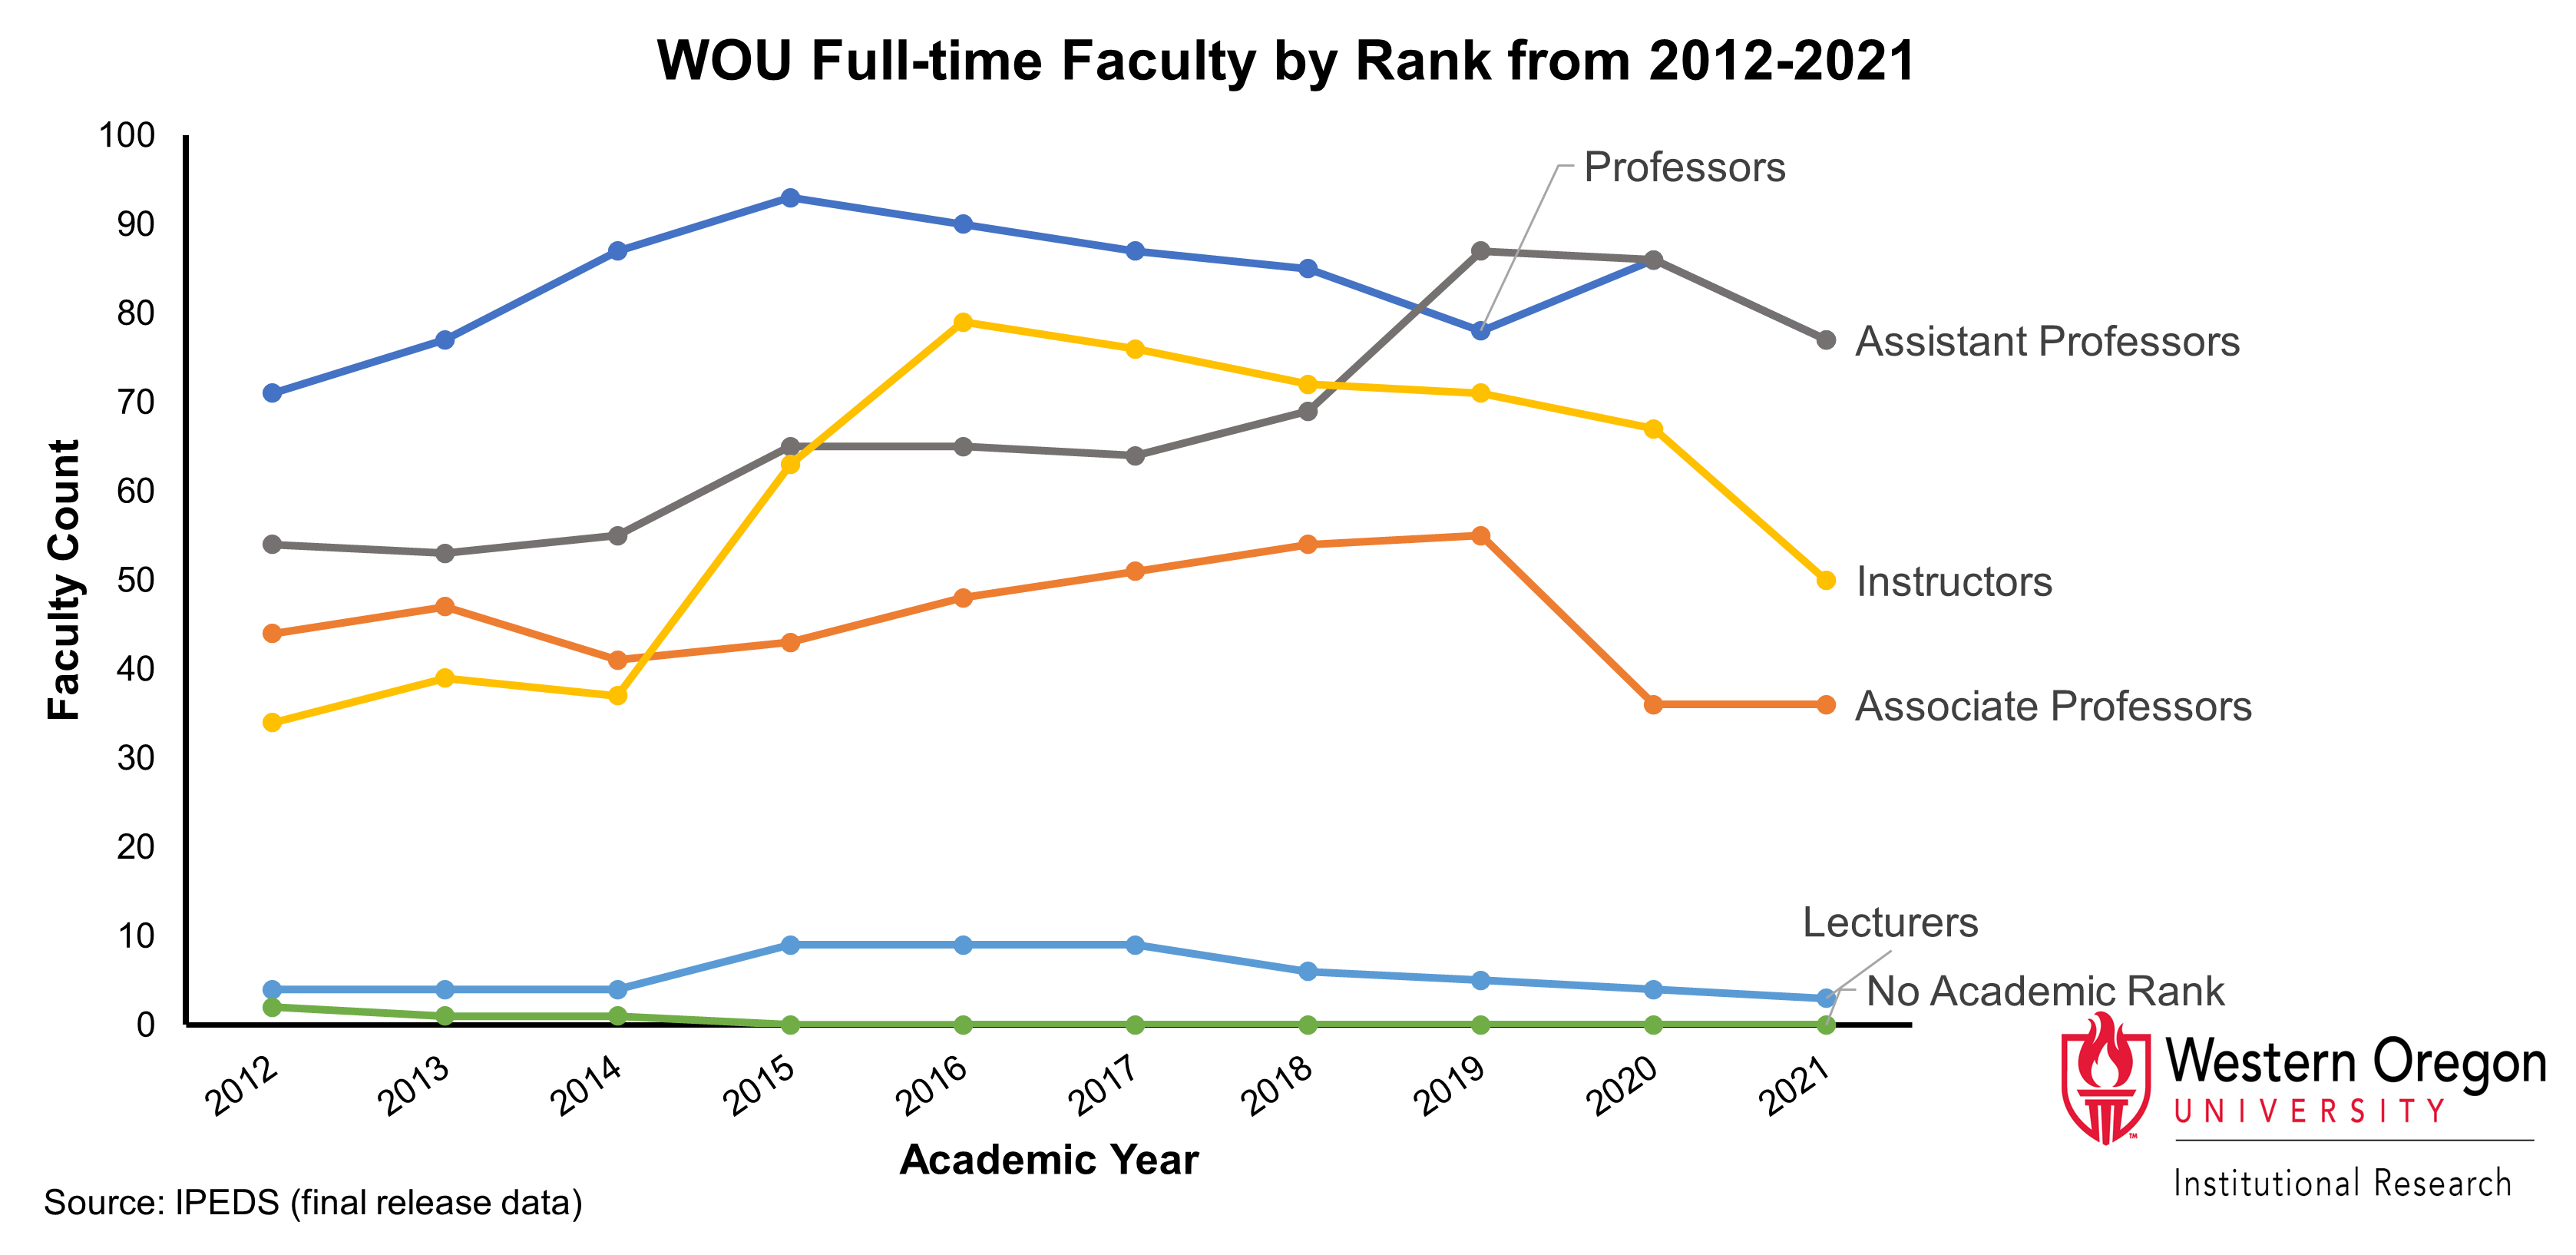 Line graph of counts for faculty at WOU since 2012, broken out by faculty rank, showing that the number of instructors and assistant professors began increasing in 2015 and then leveling out or decreasing after 2019